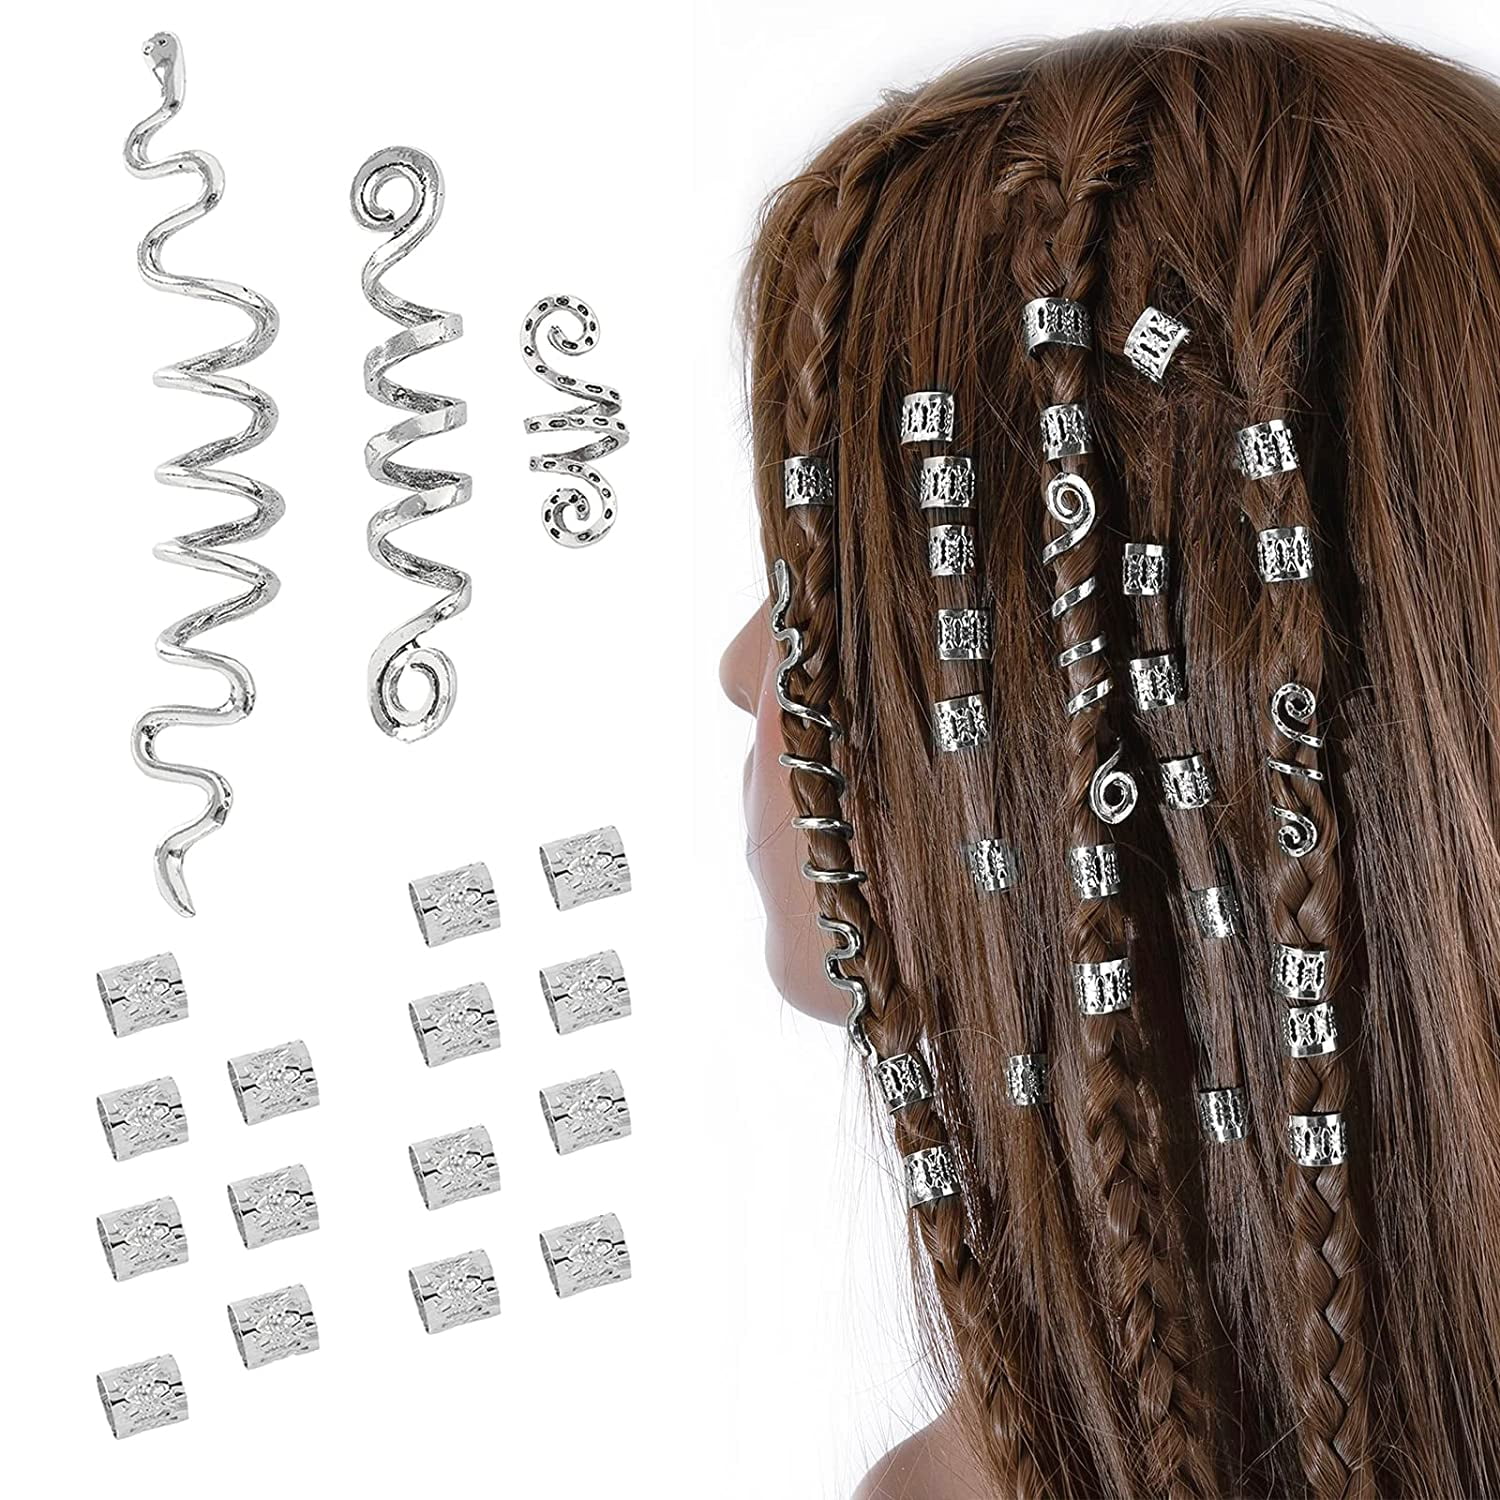  FRCOLOR 54 Pcs Hairpin Hair Pull Through Tool Kids Ponytail  Styling Tool Small Beaders for Hair Braids Braid Tool Hair Pull Through  Tool Ponytail Miss Plastic Headgear : Beauty 